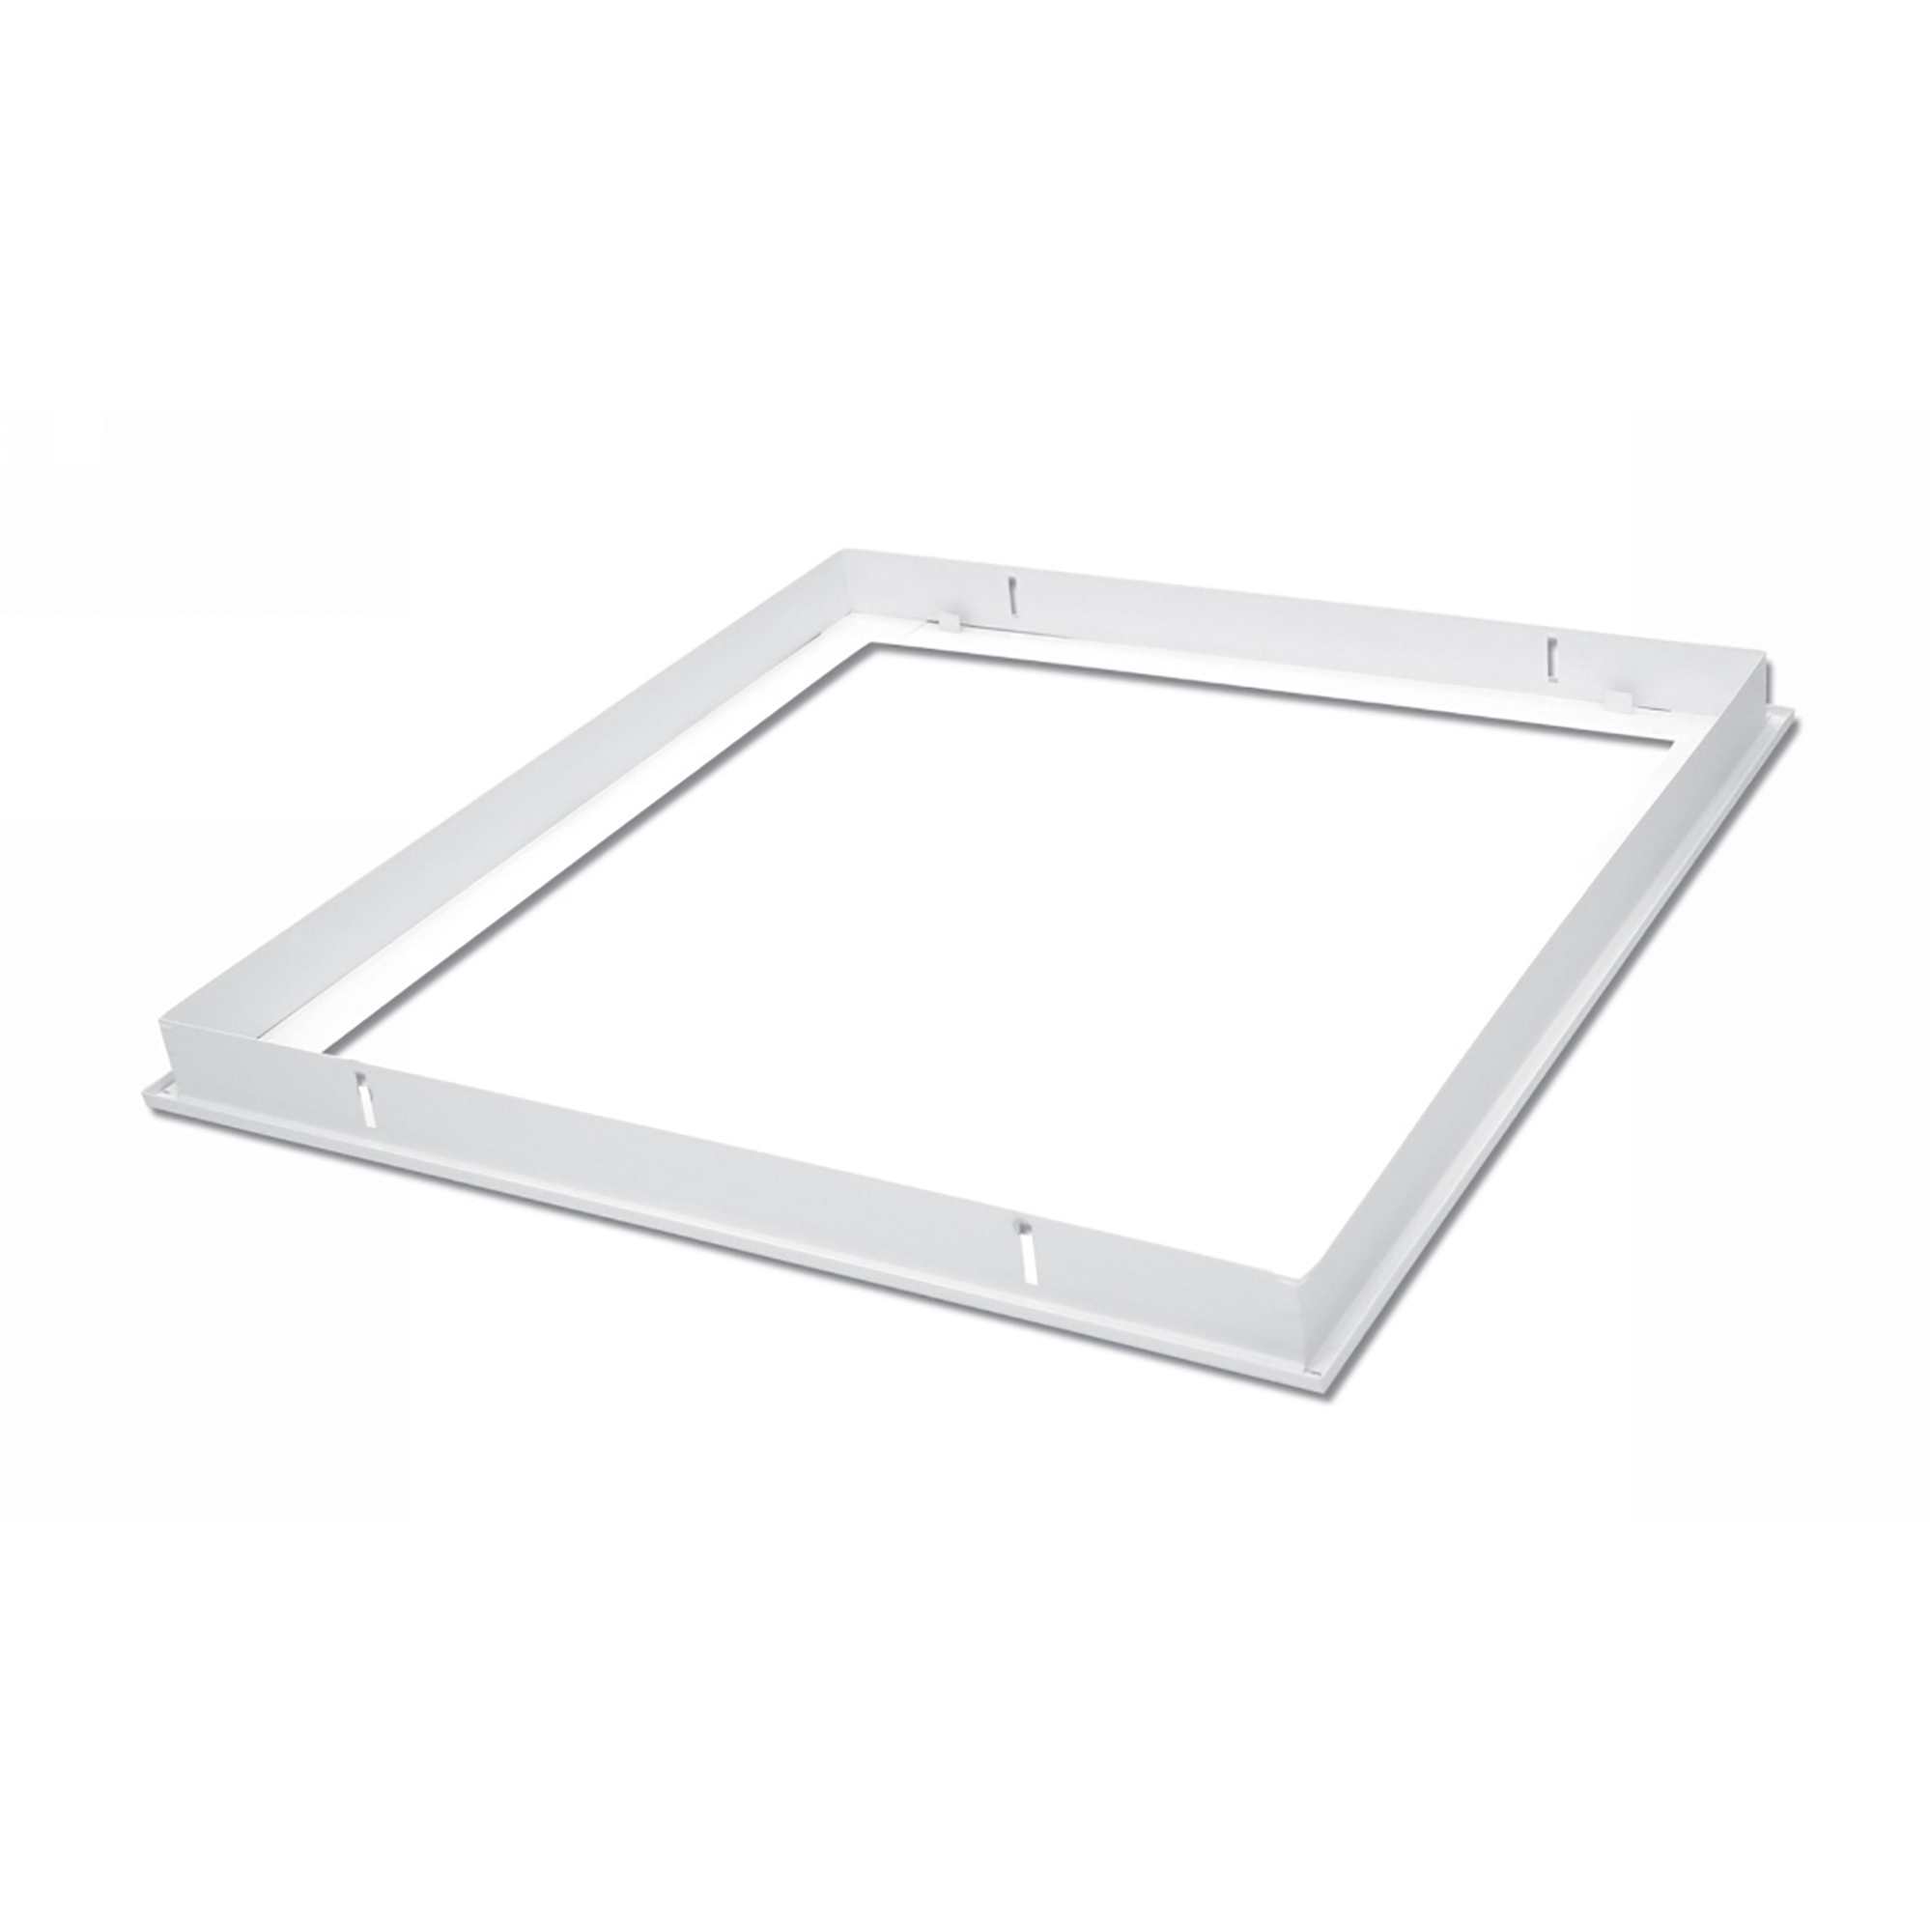 DA240006/TW  Piano 66 Flush Recessed Frame For Plaster Board In Textured White, 645x625x45mm, Cut-Out 625x605mm For Panel, 5yrs Warranty